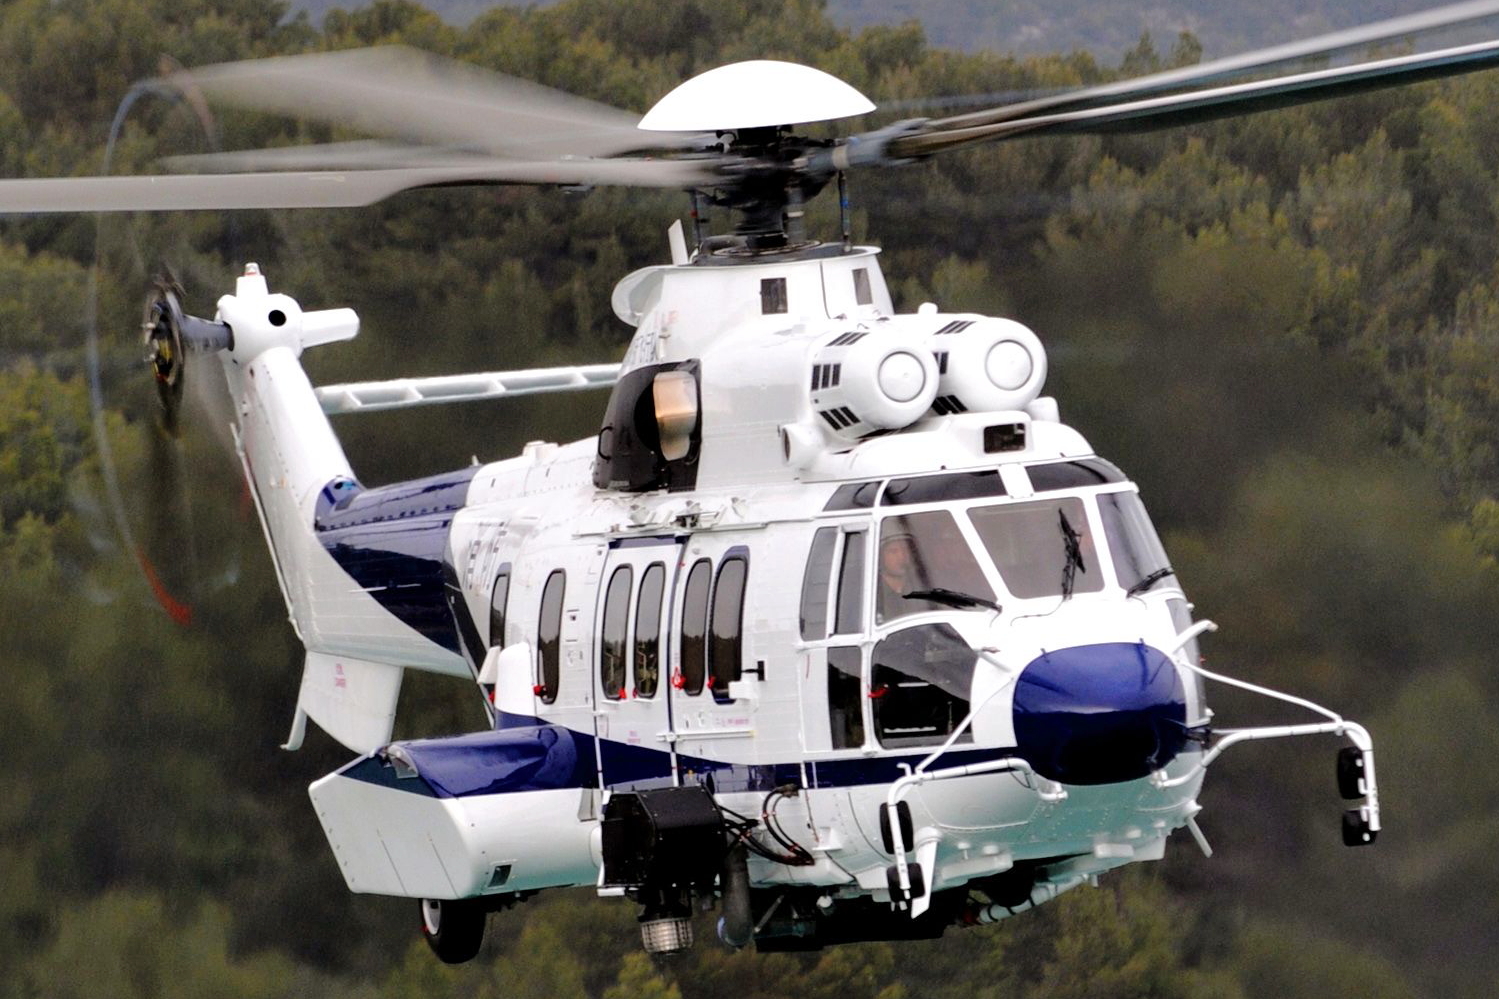 Japan’s National Police Agency (NPA) has ordered one new Airbus H225 (pictured) and four Airbus H135 helicopters as part of its fleet modernisation programme. Click to enlarge.